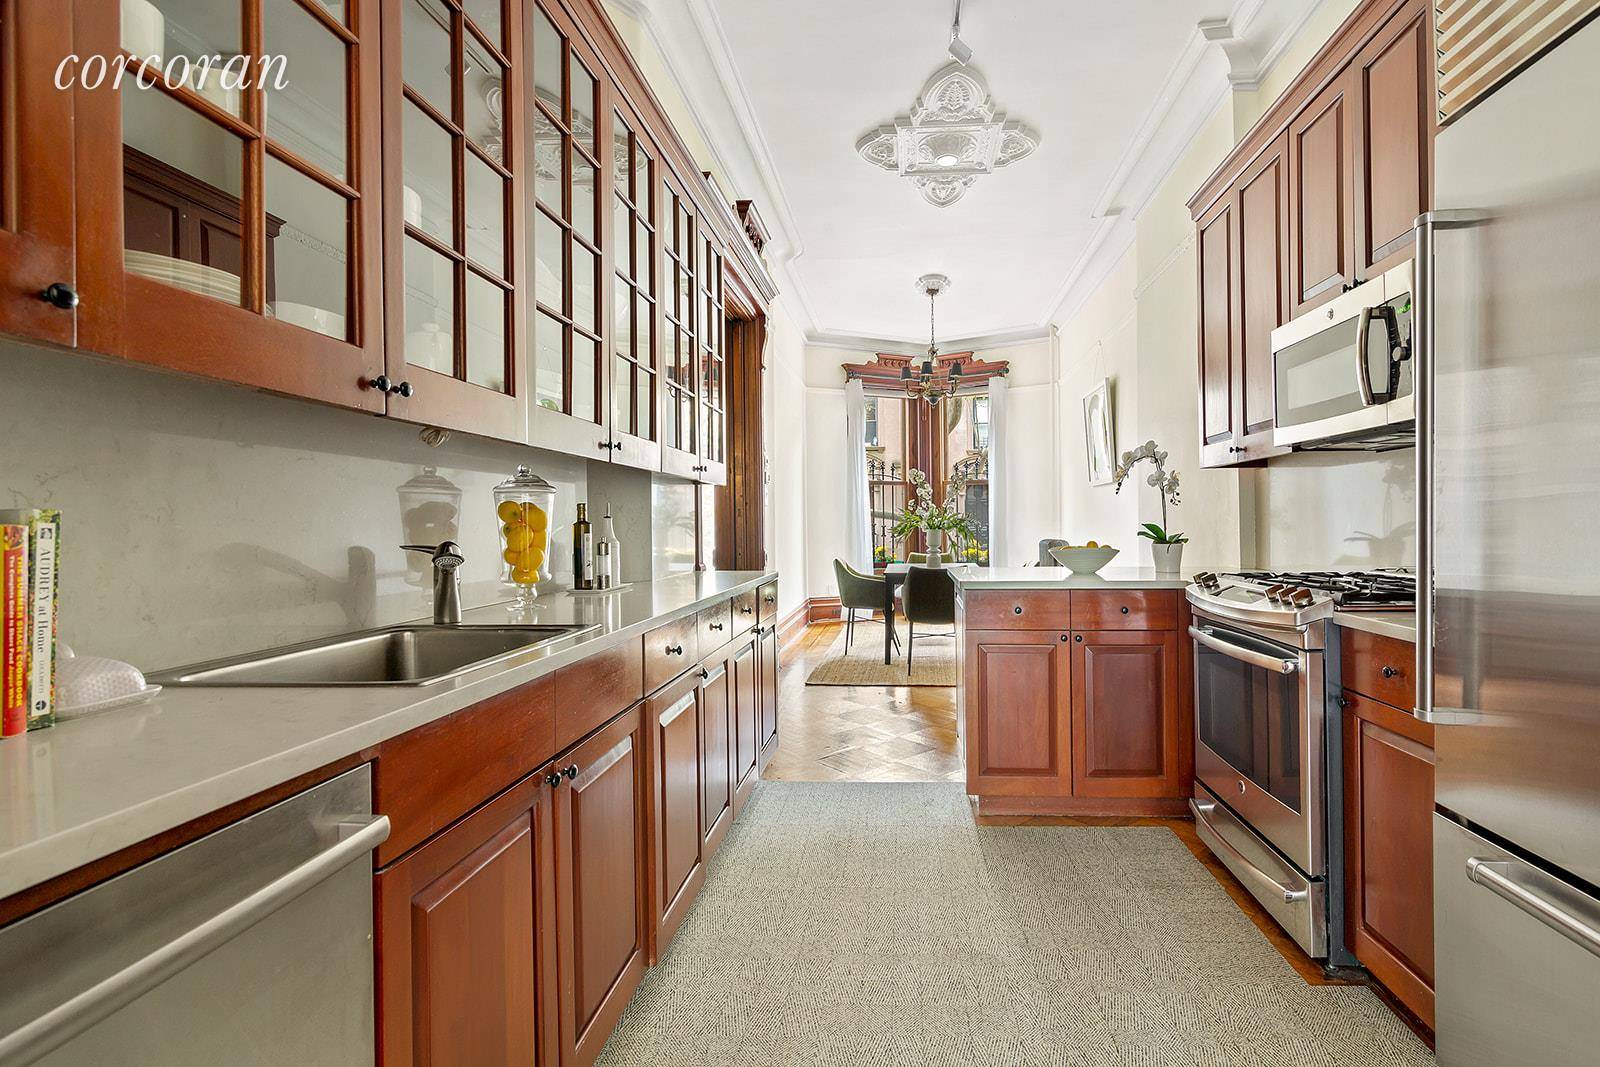 145 Berkeley Place New Nice Price This beautifully preserved and historically significant four story, two family brownstone features a stunning owner's four bedroom triplex and a detail rich one bedroom ...